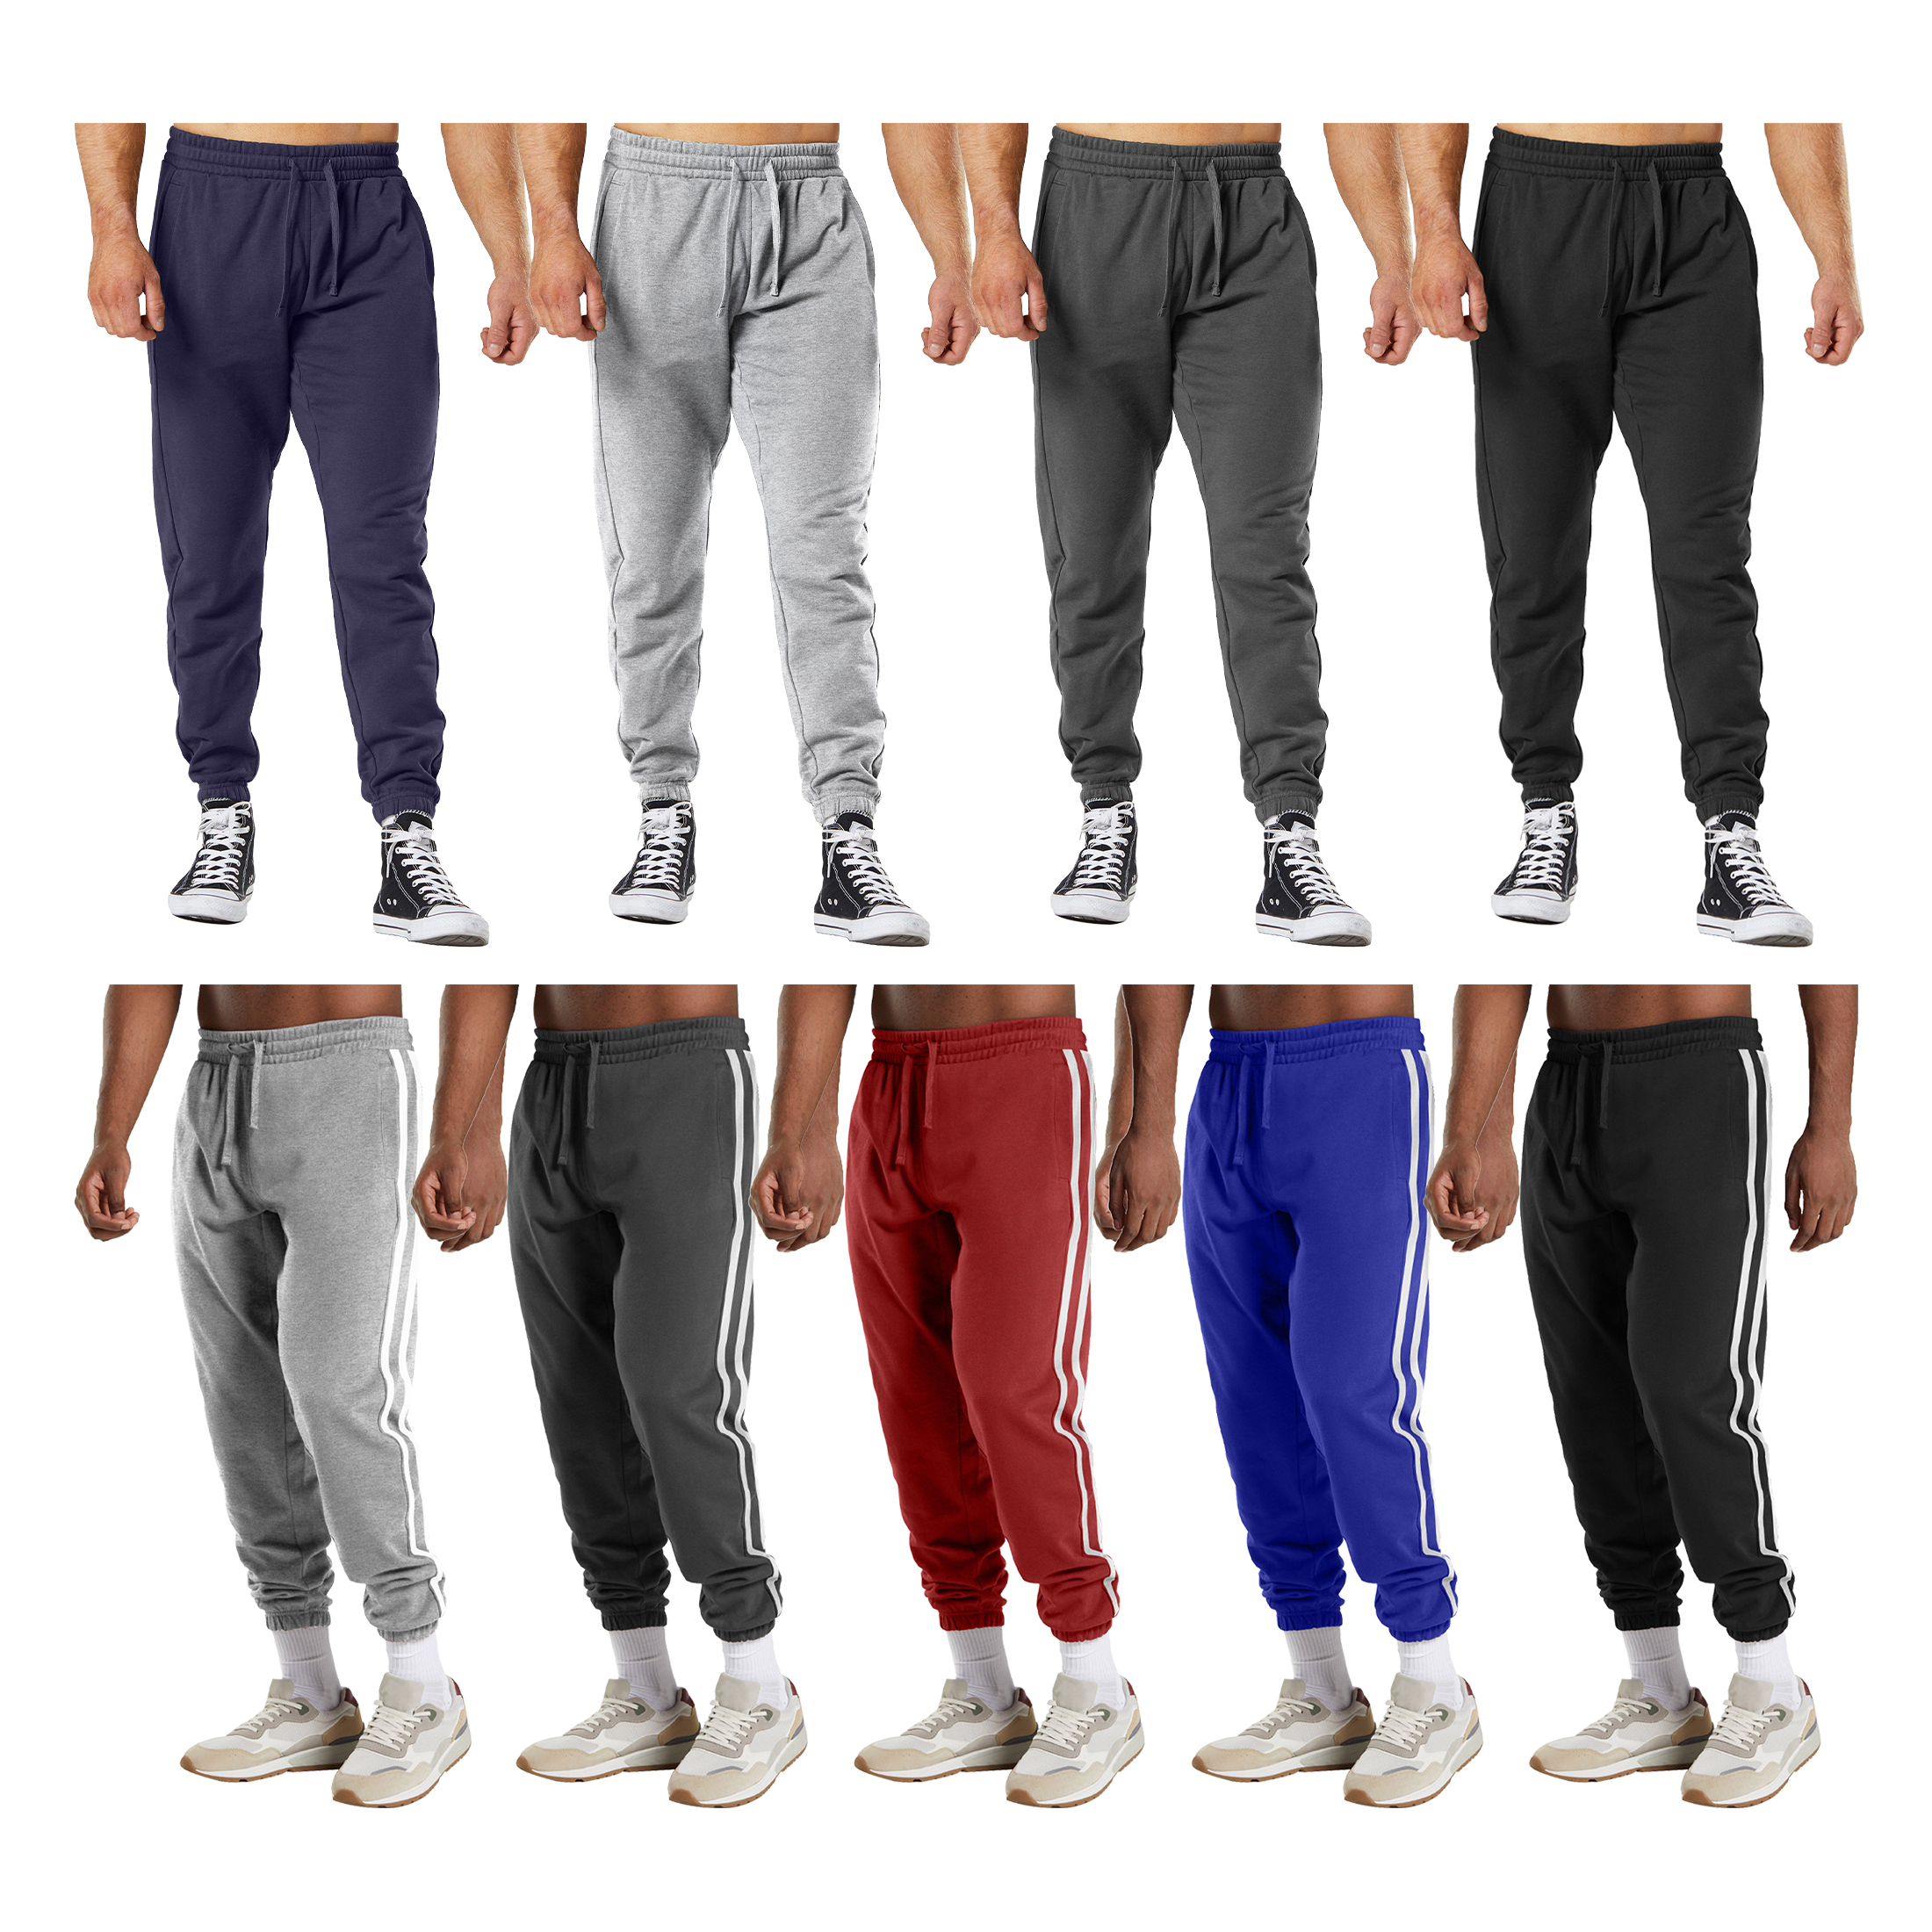 Multi-Pack: Men's Casual Fleece-Lined Elastic Bottom Jogger Pants With Pockets - 3-PACK, XL